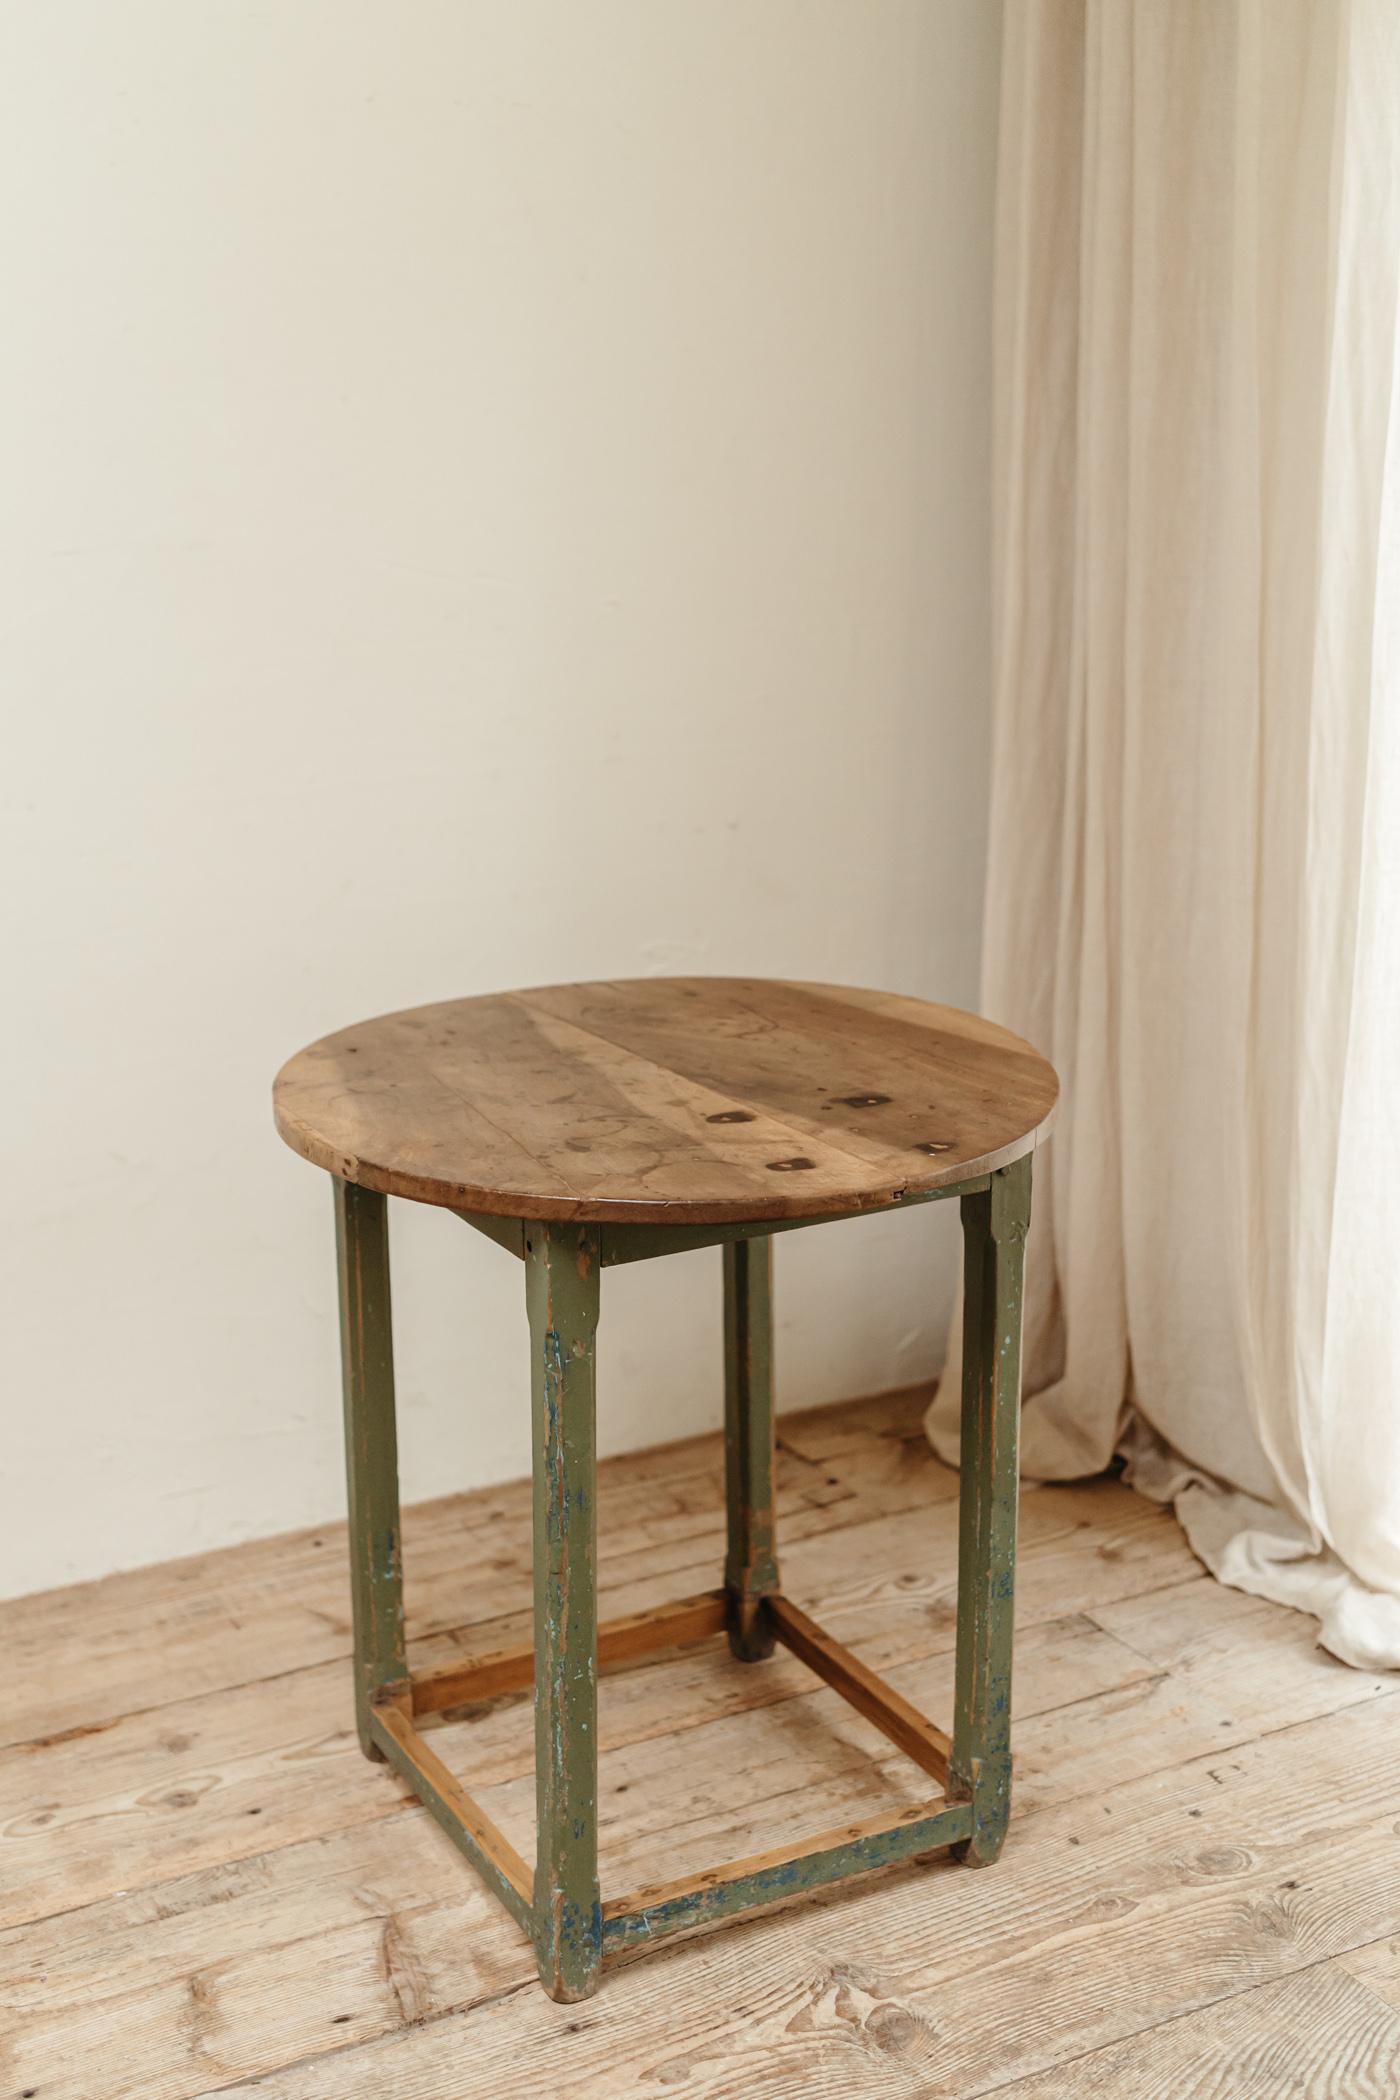 A fruitwood topped table on a pine green painted base, elegant and sturdy,
in very good vintage condition.